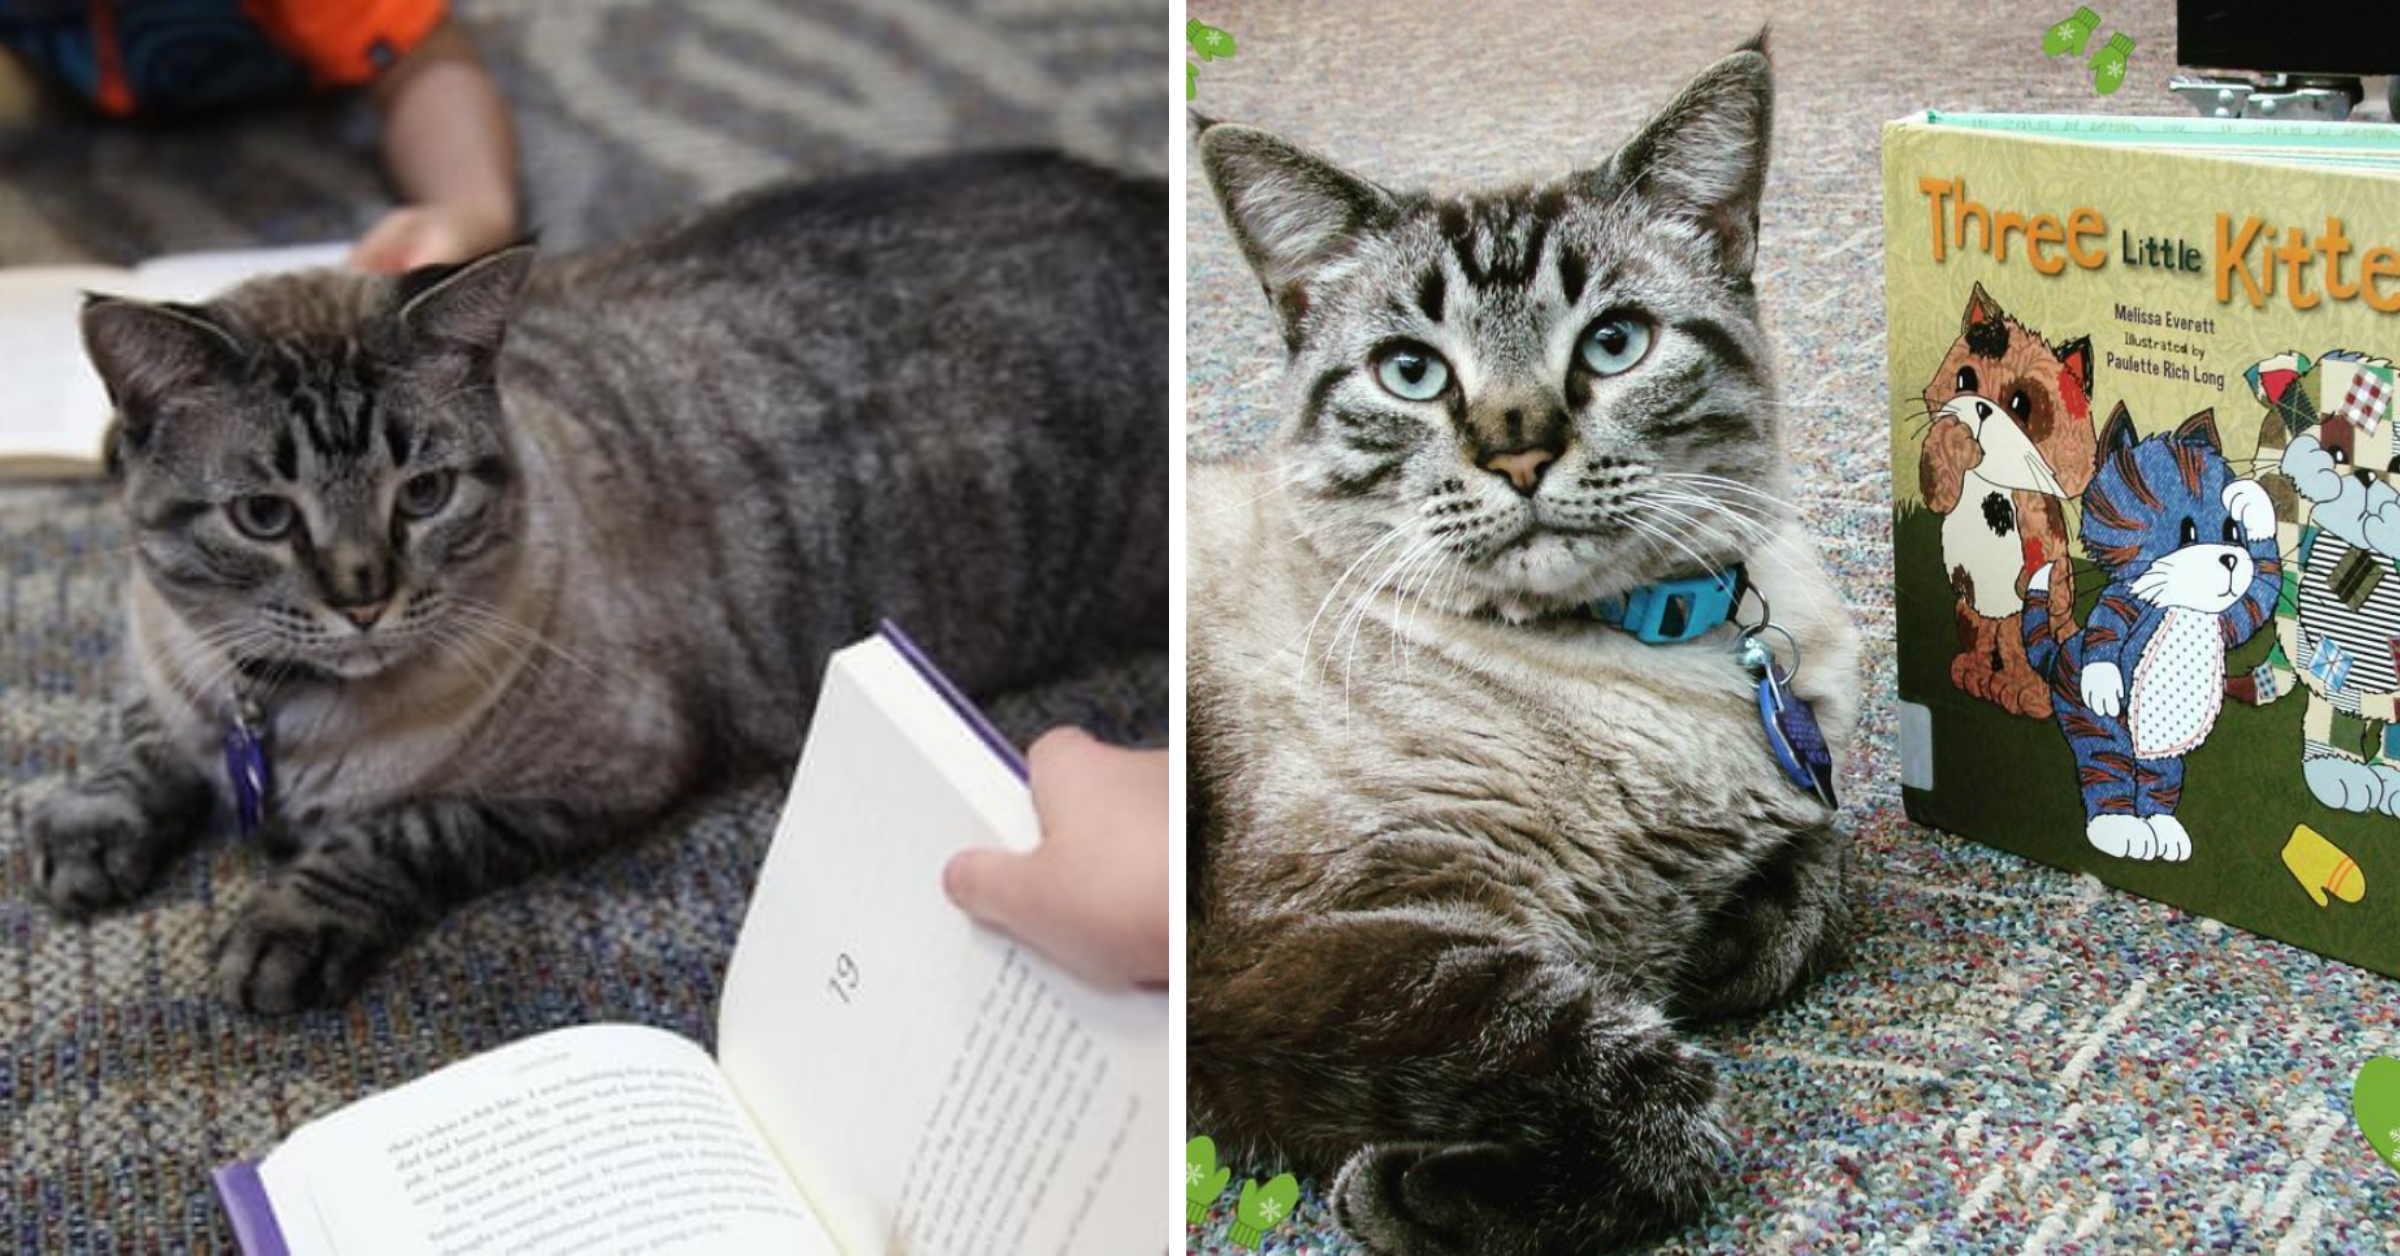 Library Cat Emerged Triumphant, Reclaims Job After Wrongfully Fired & Evicted by City Council